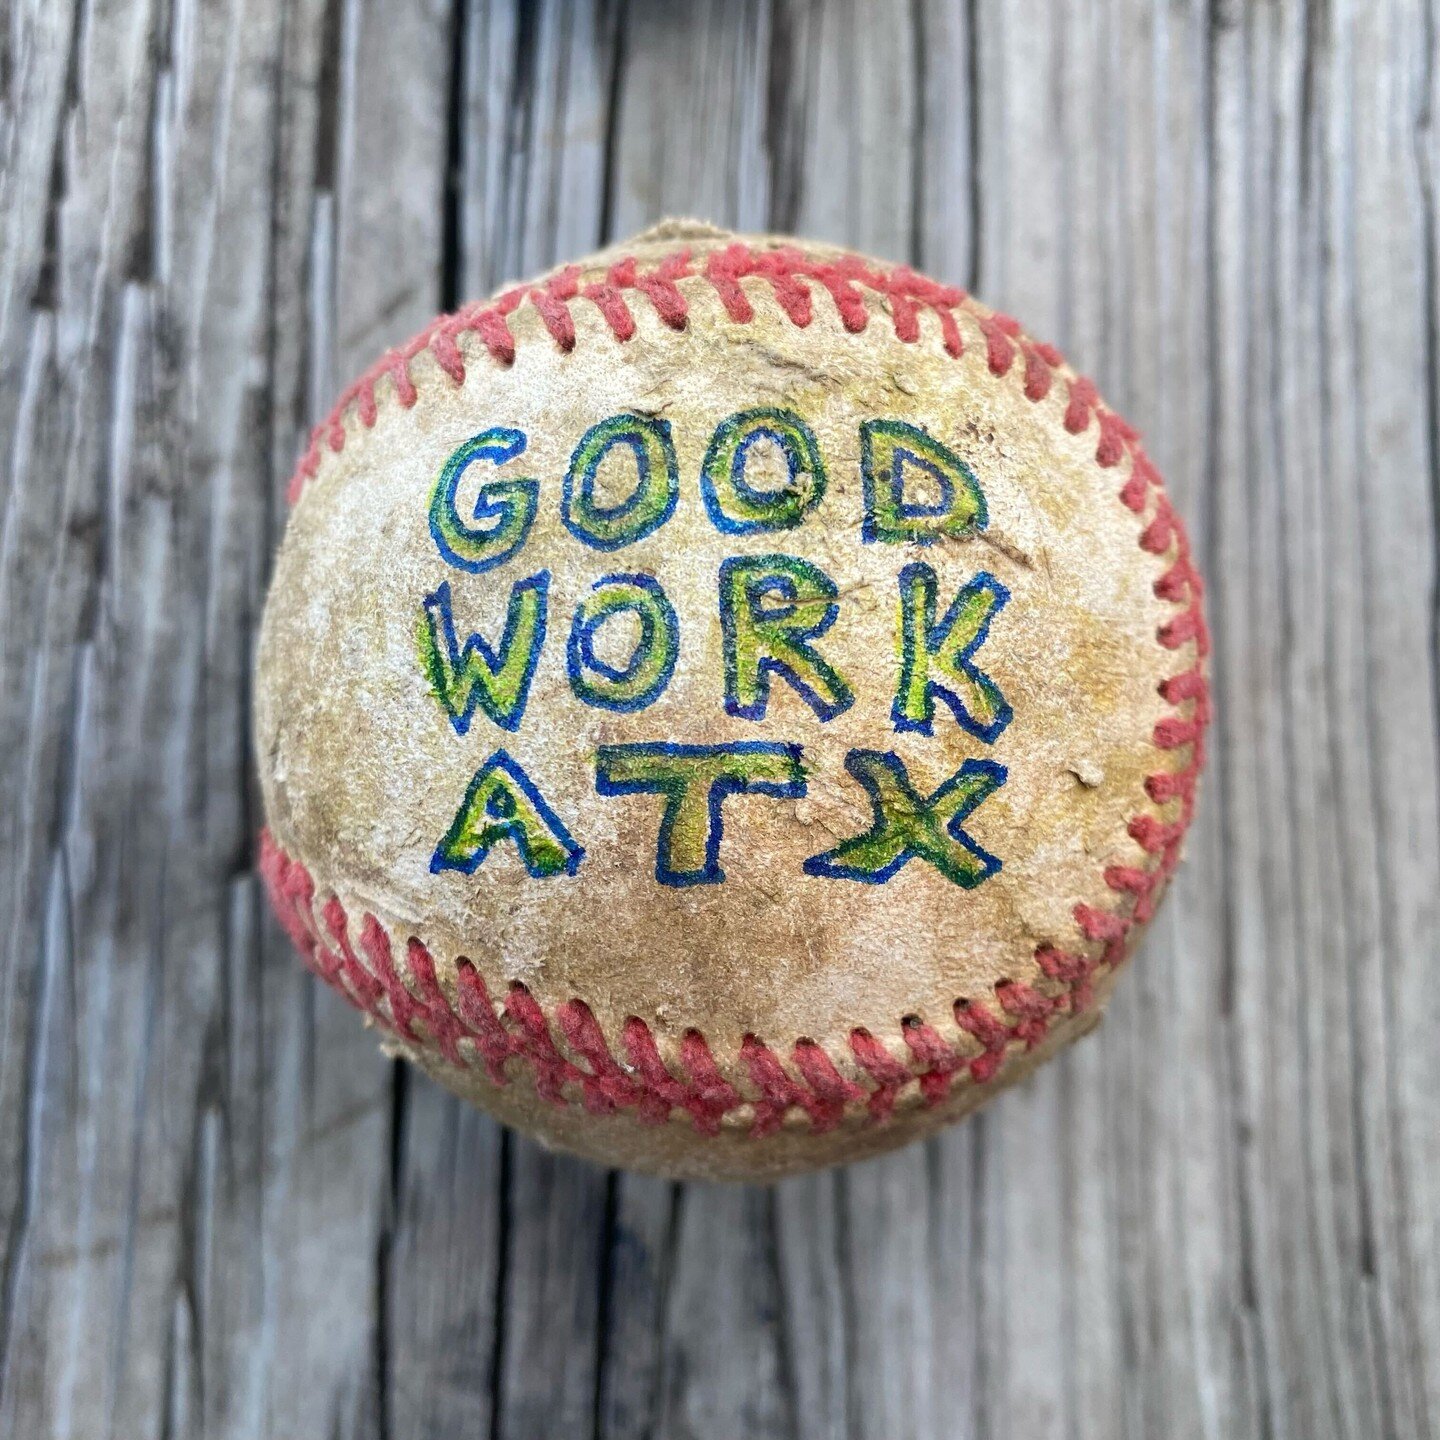 We hope you&rsquo;ll join us on Saturday, May 6th, for the @texasplayboysbaseball game at The Long Time (5707 Dunlap Rd N, Austin, TX 78725) for a doubleheader benefitting Good Work Austin. 

This family-friendly event will be a day of outdoor fun, l